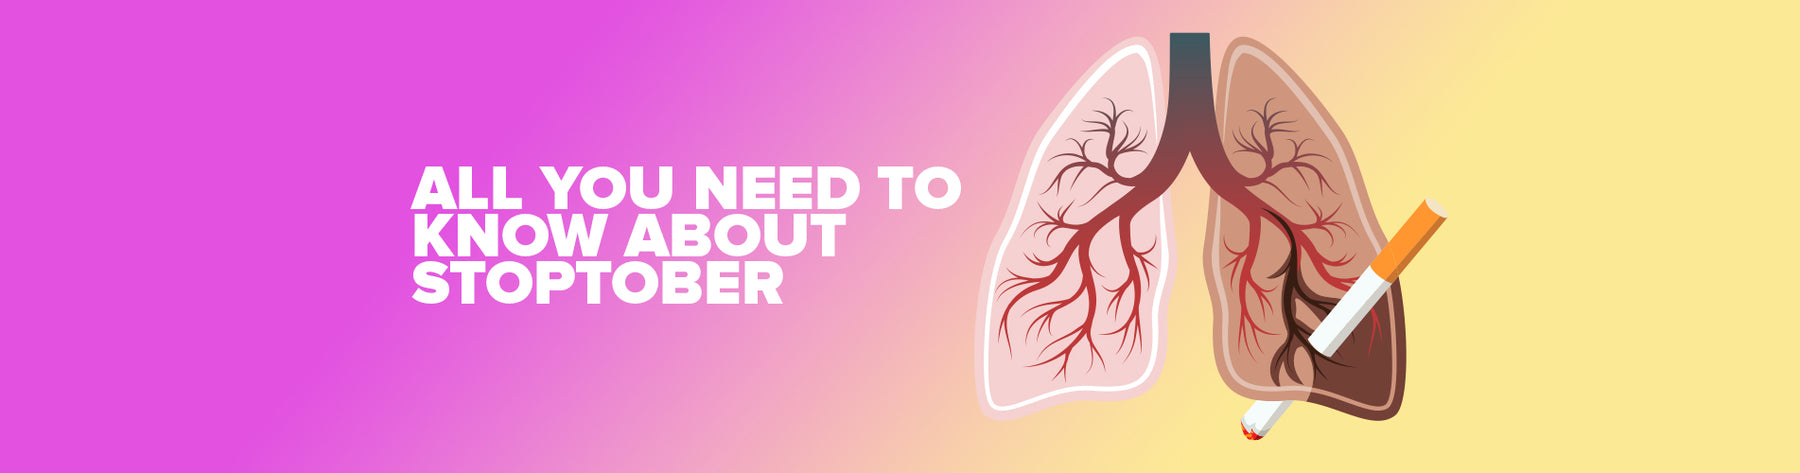 All You Need To Know About Stoptober